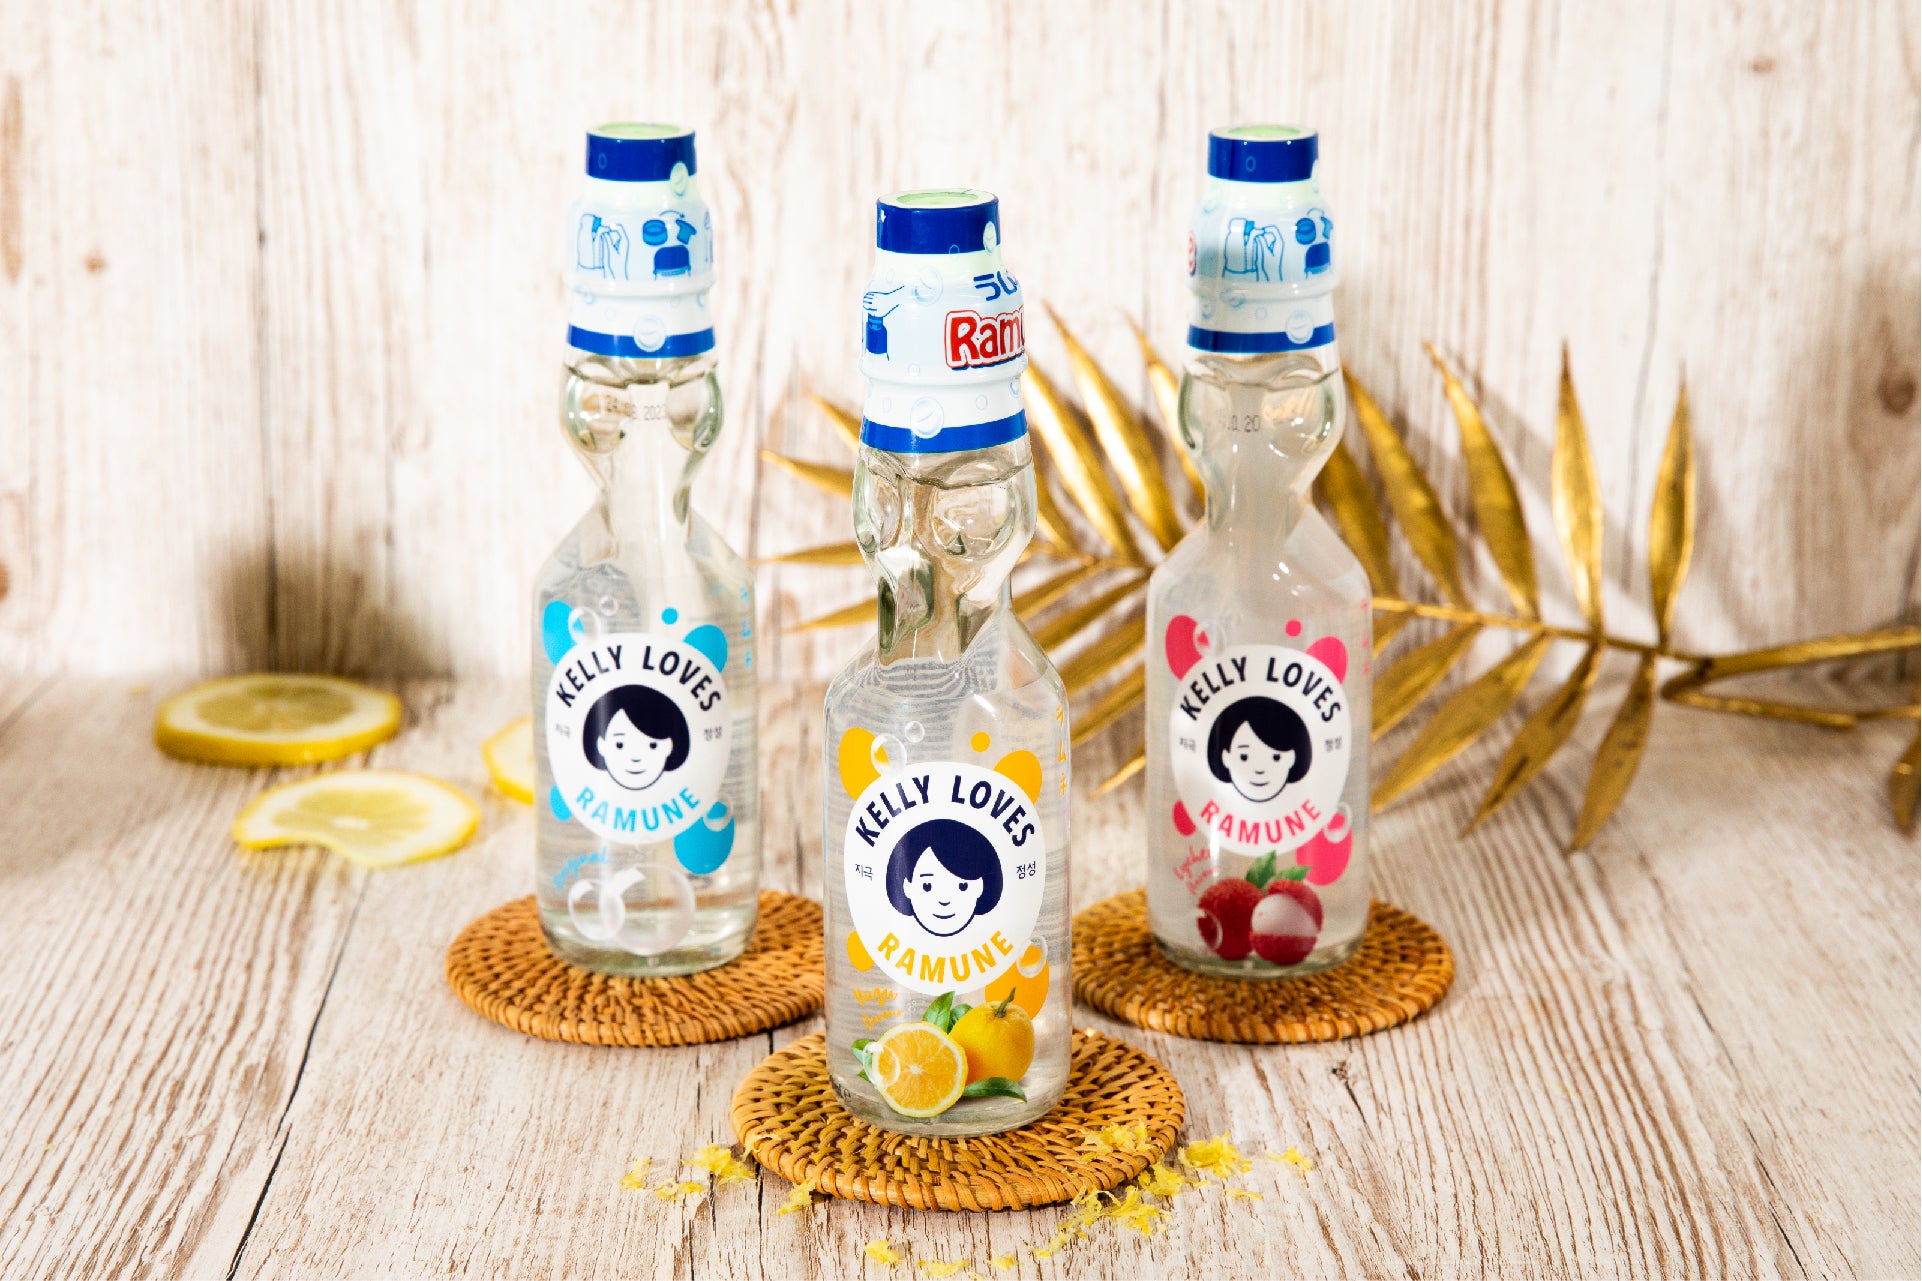 Why Does Ramune Have Marble Kelly Loves